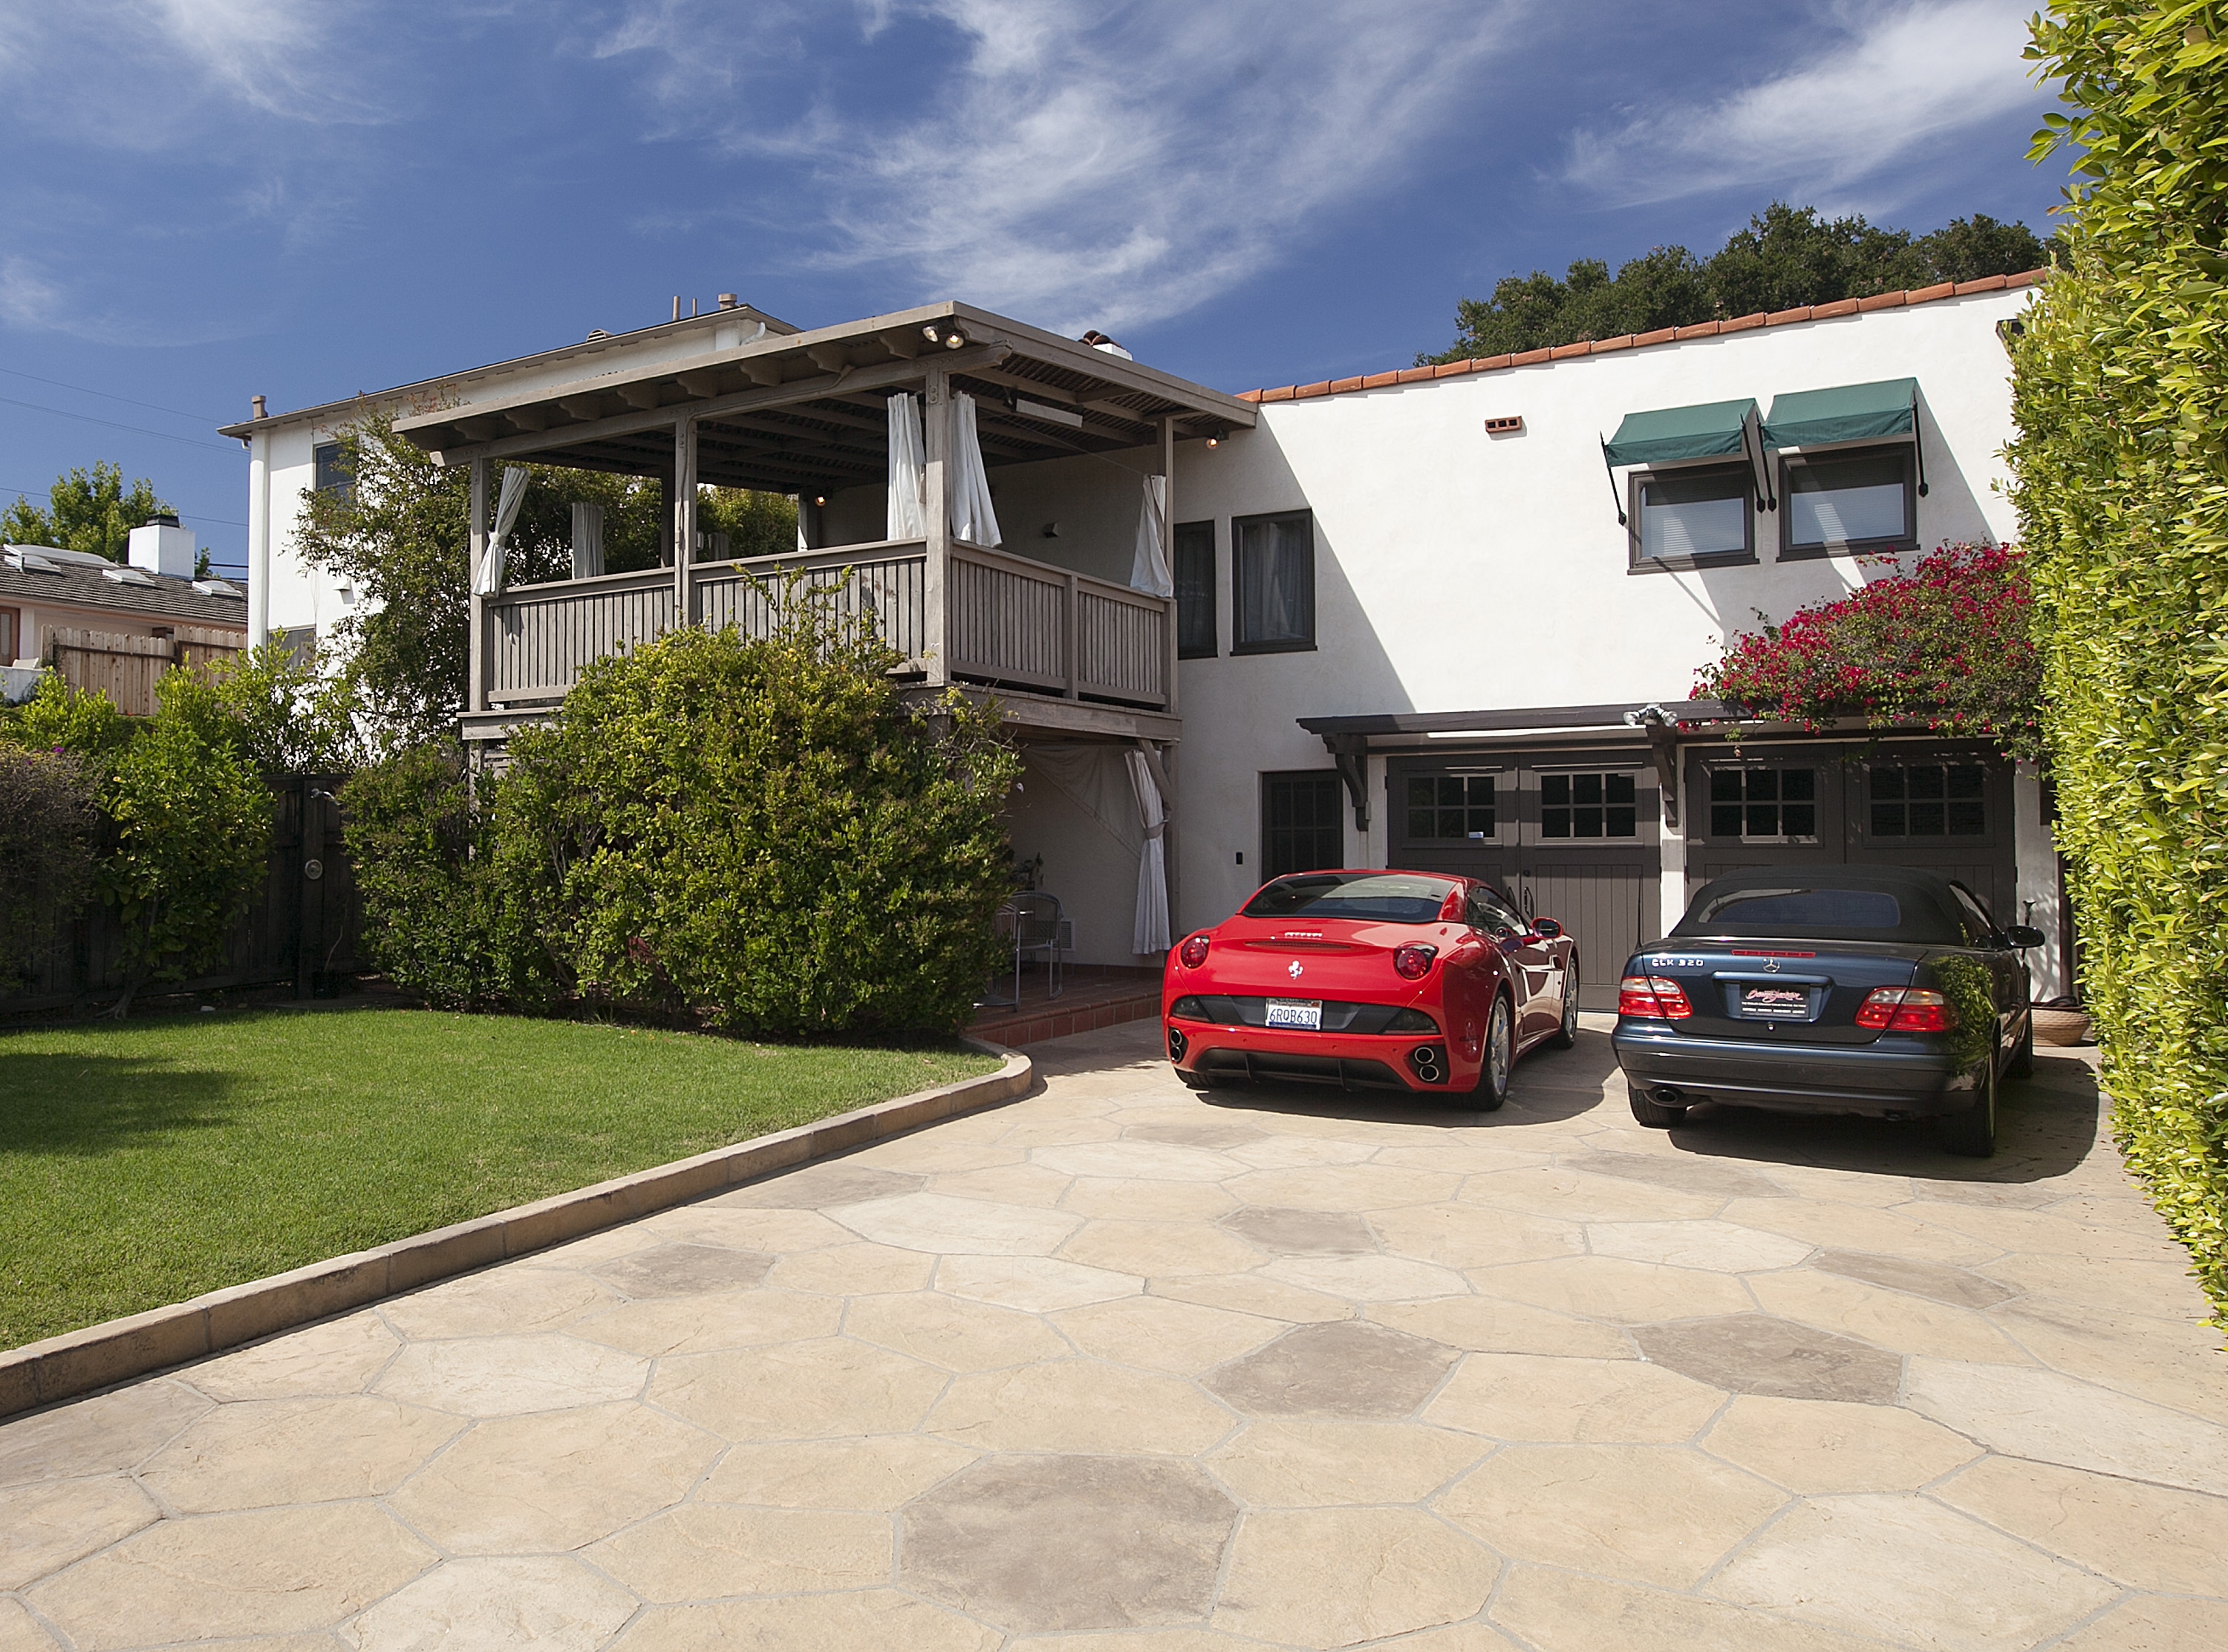 driveway with cars